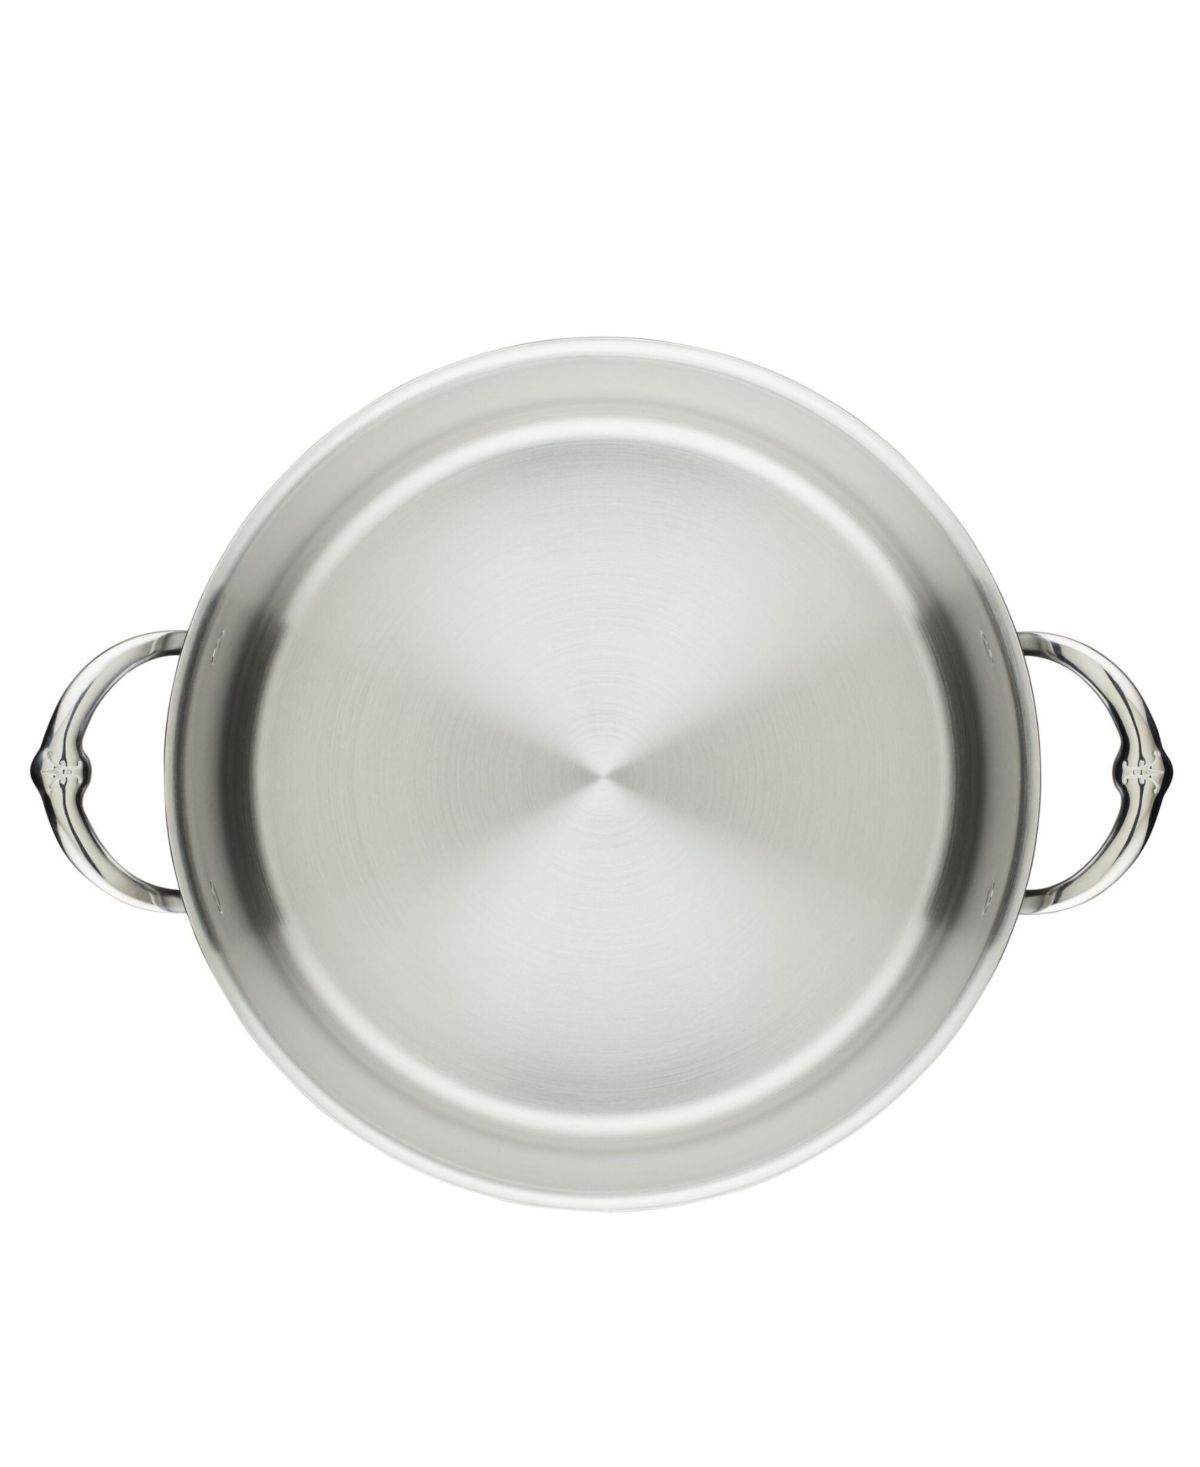 Shop Hestan Thomas Keller Insignia Commercial Clad Stainless Steel 12-quart Open Stock Pot In No Color